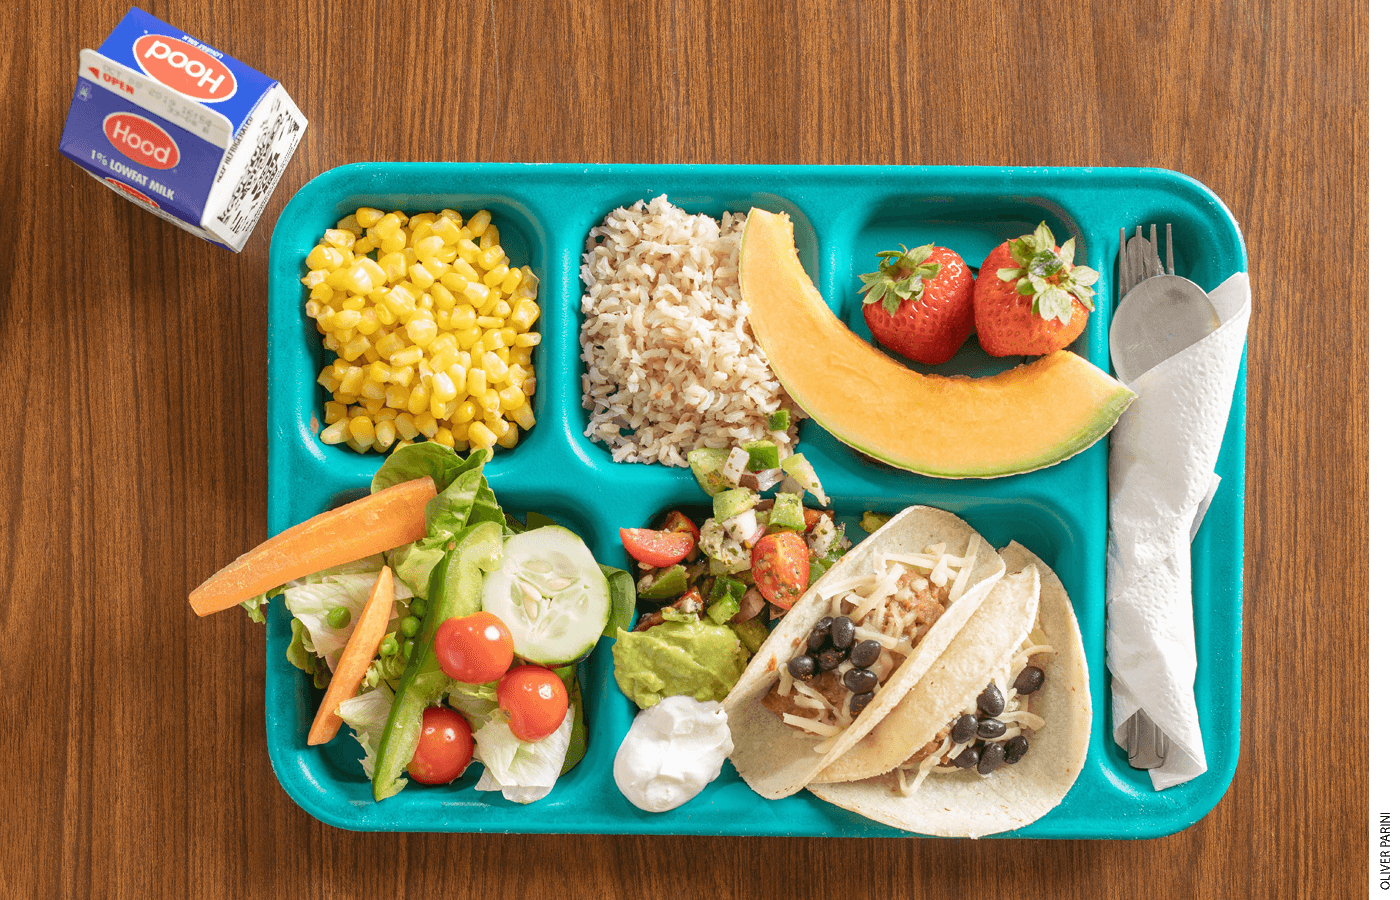 The United States Department of Agriculture does not seem particularly interested in enforcing income eligibility rules for the school lunch program.